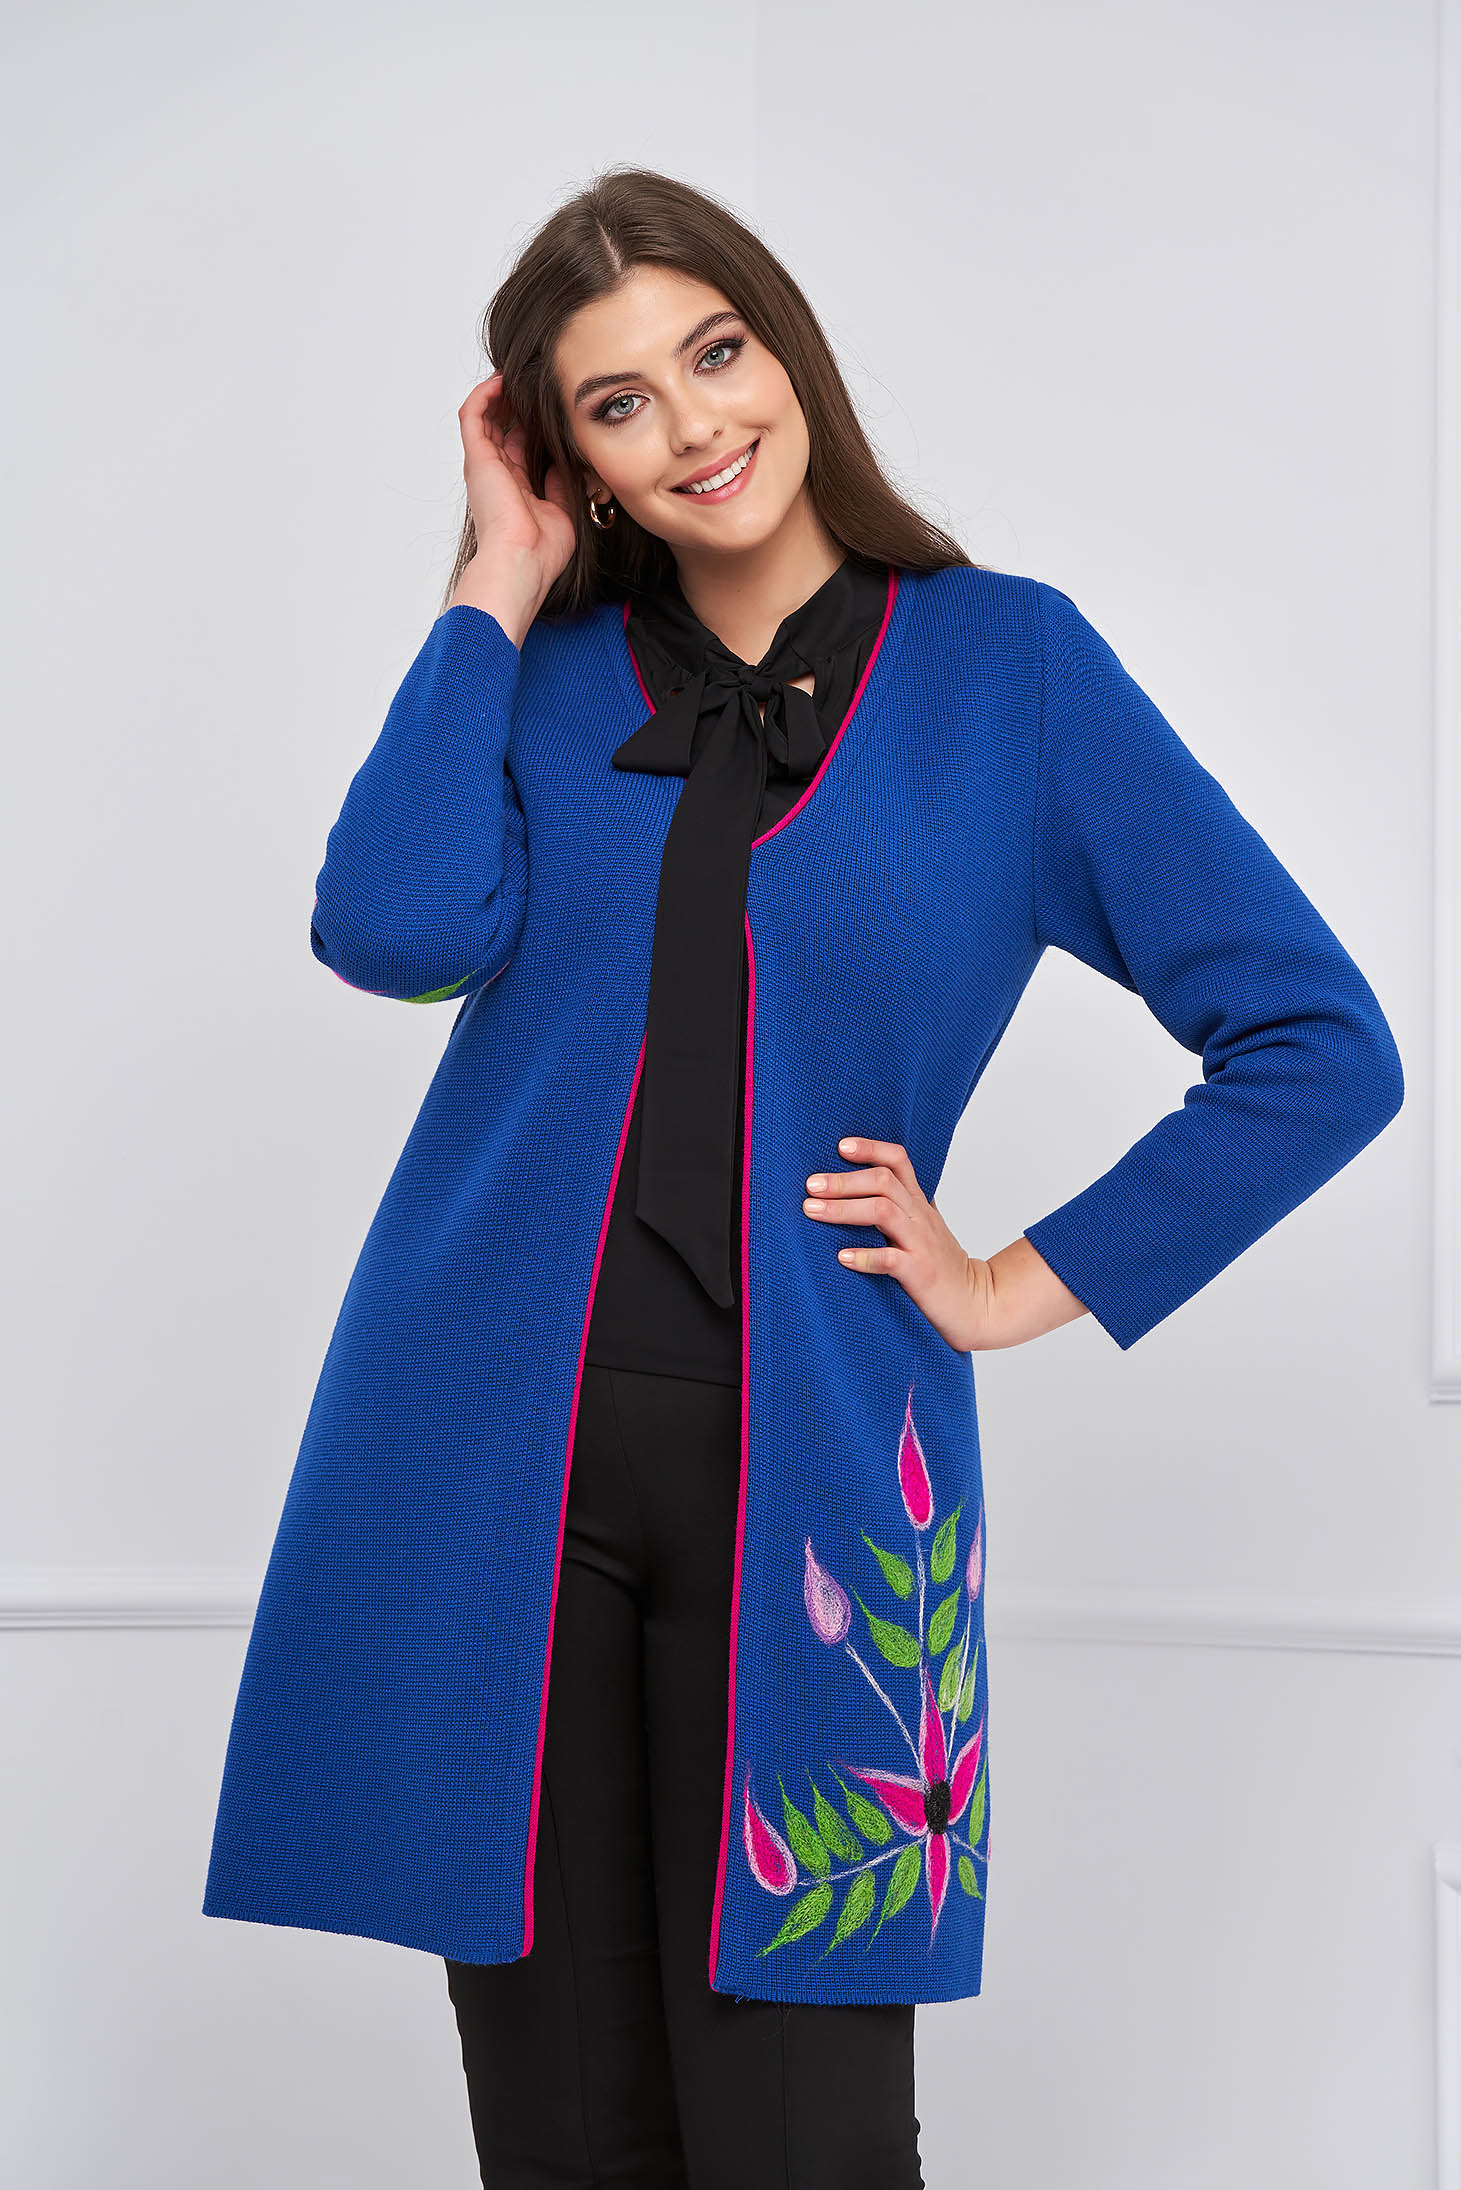 Blue cardigan knitted front closing